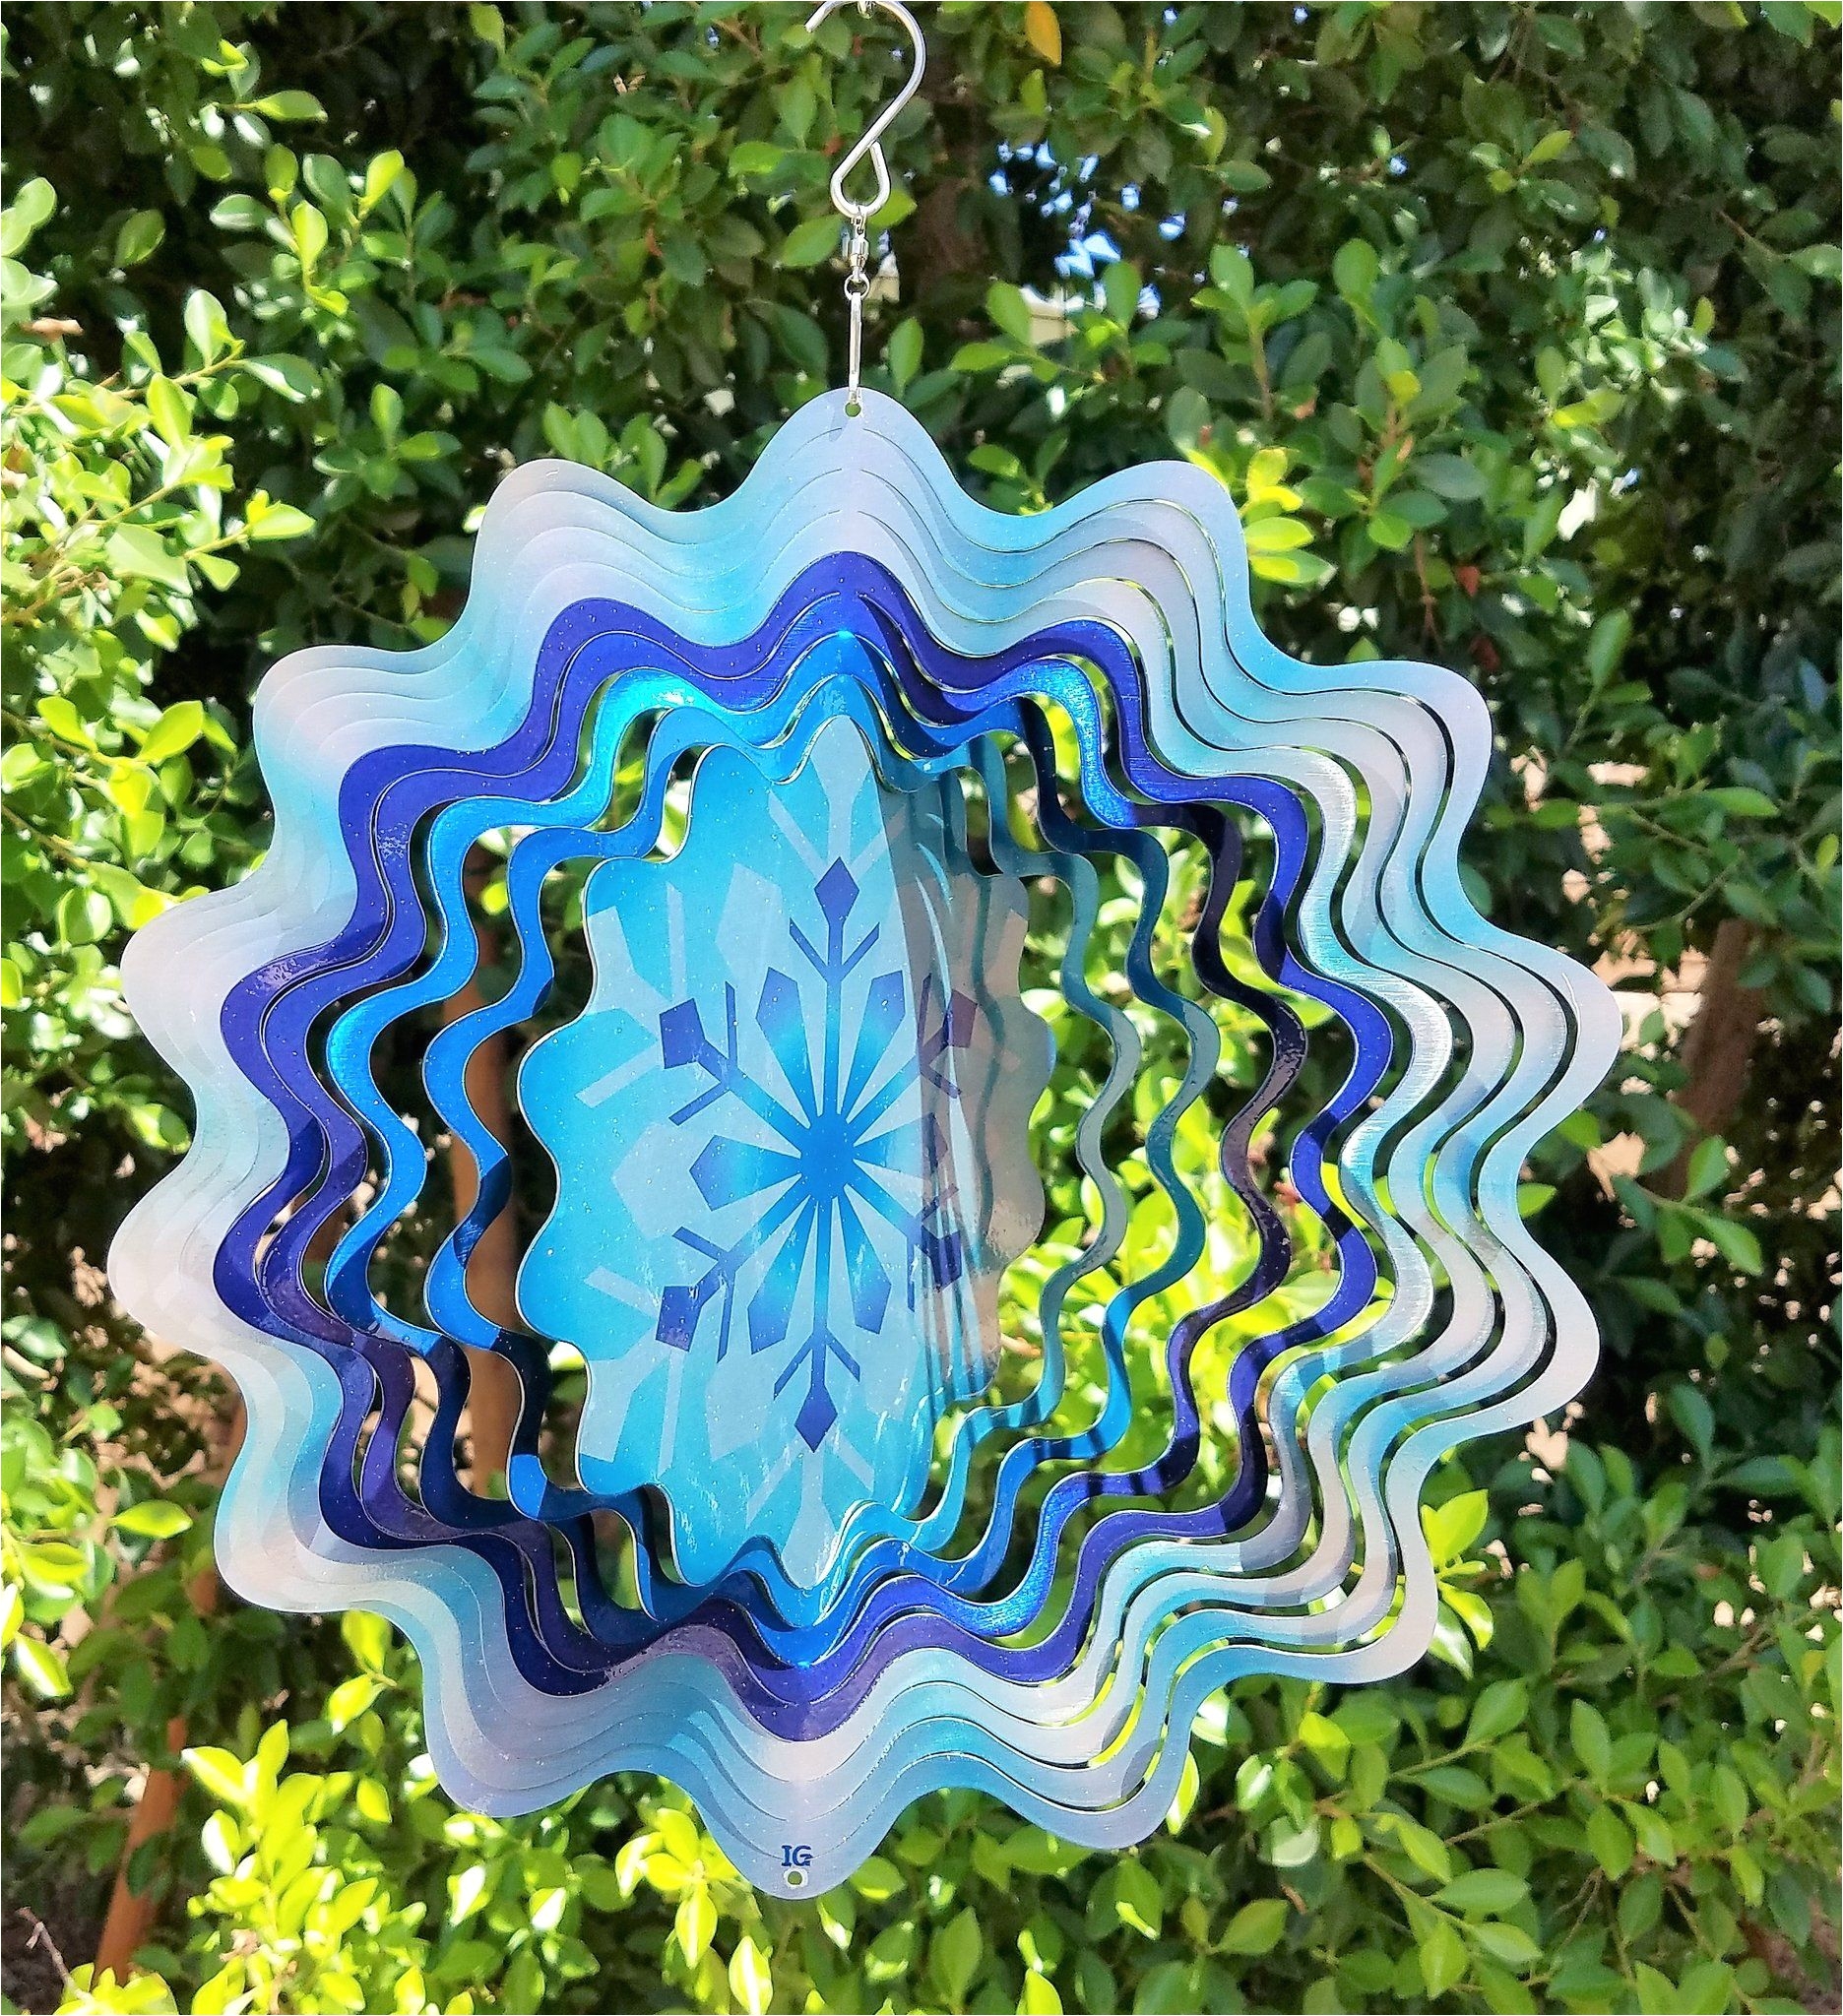 snowflake silver blue garden wind spinner metal yard art and outdoor decor 12 inch